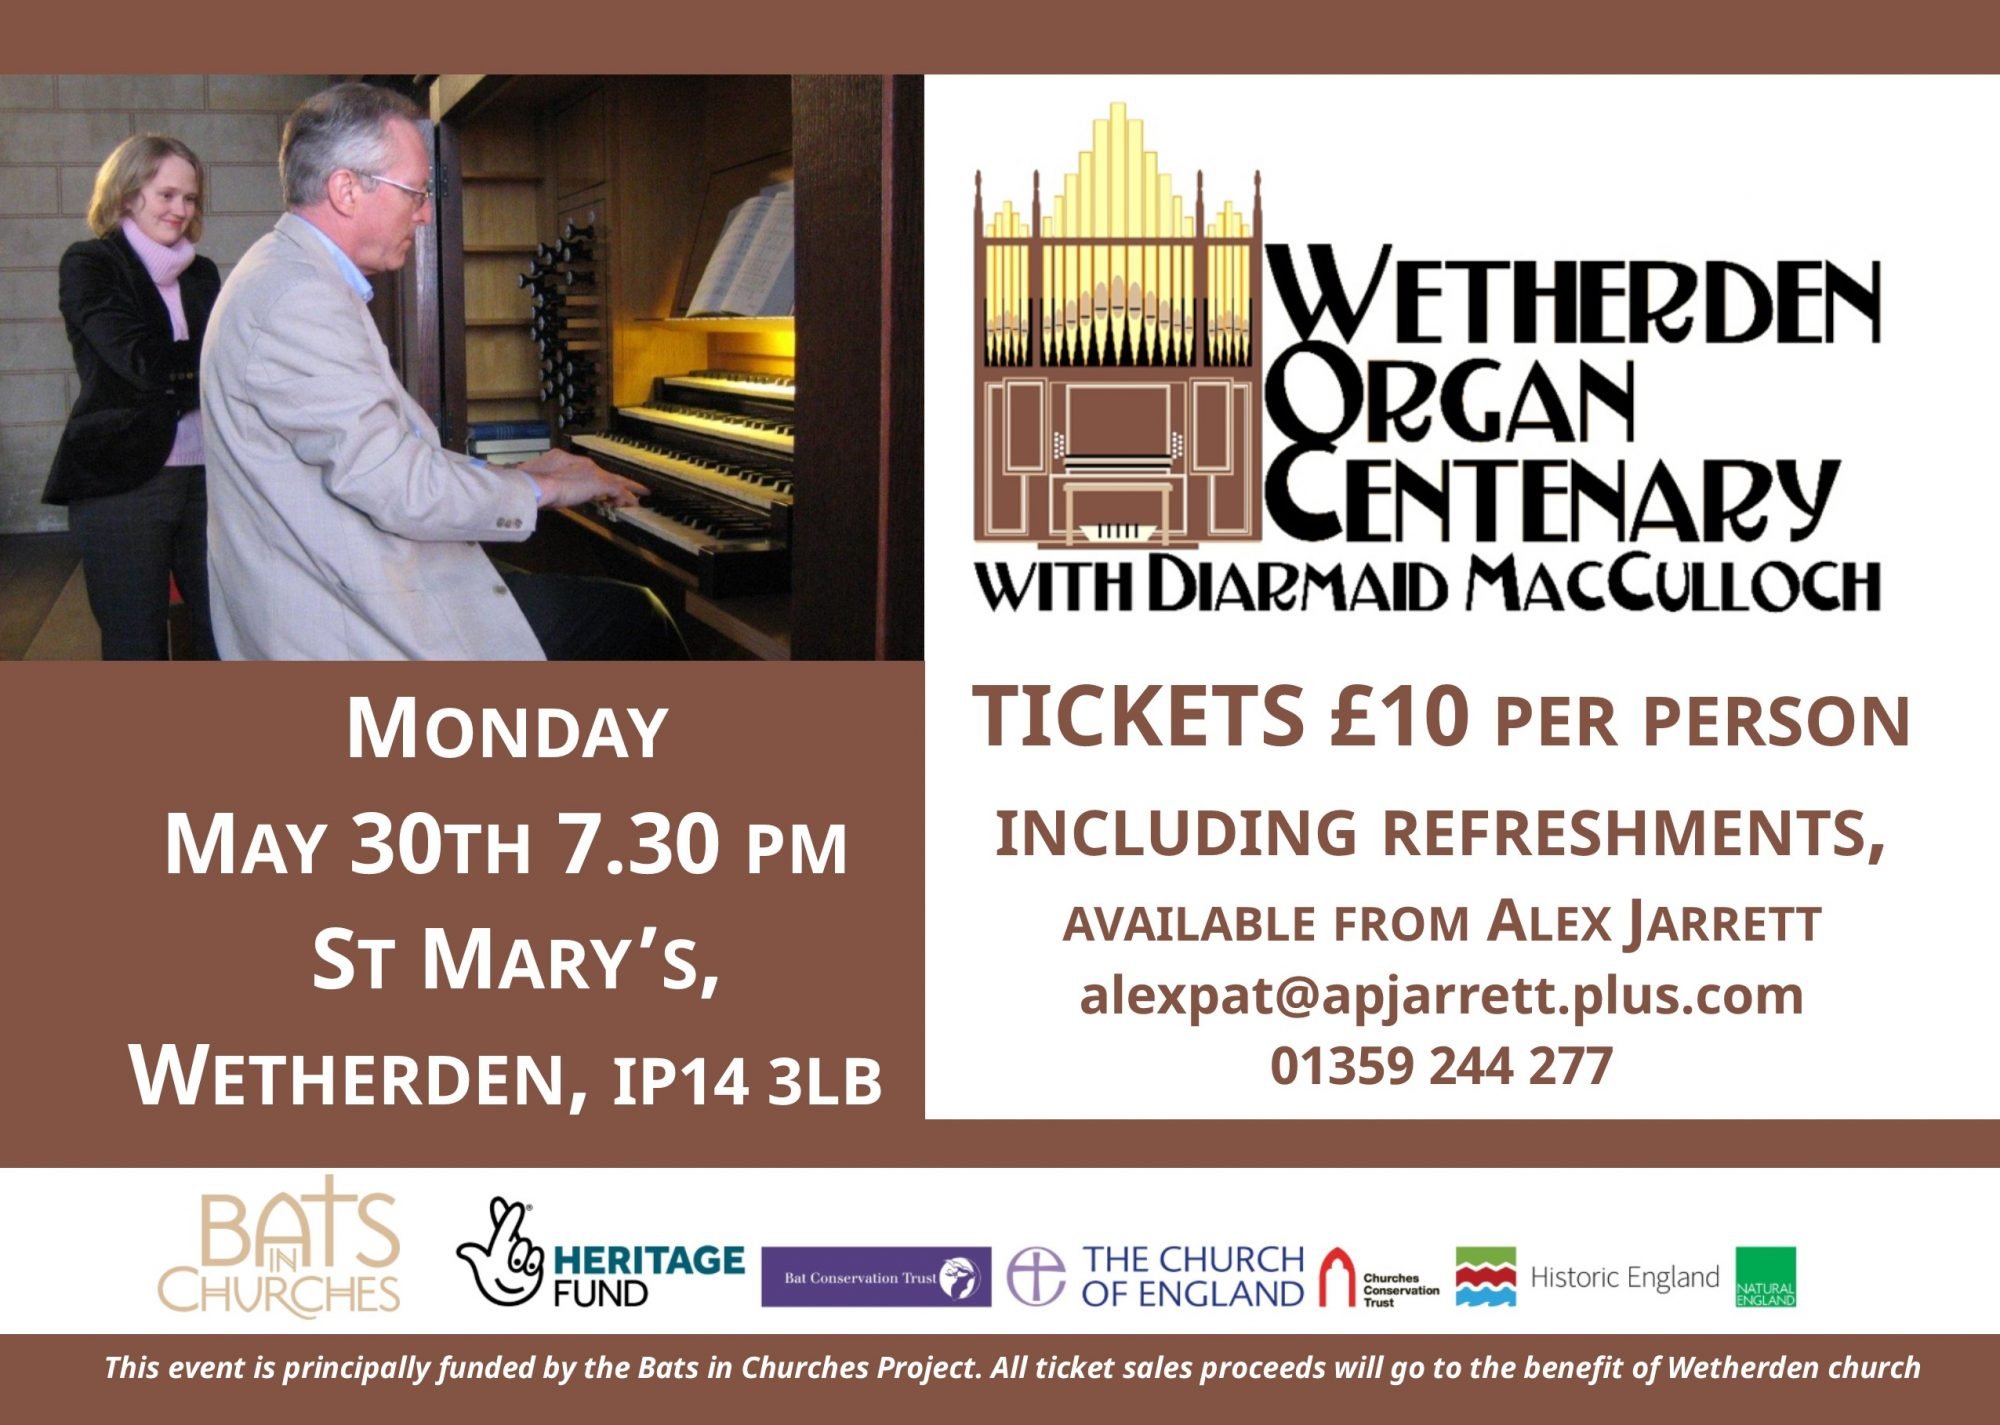 Poster for Wetherden Organ Festivel, text reproduced on event page